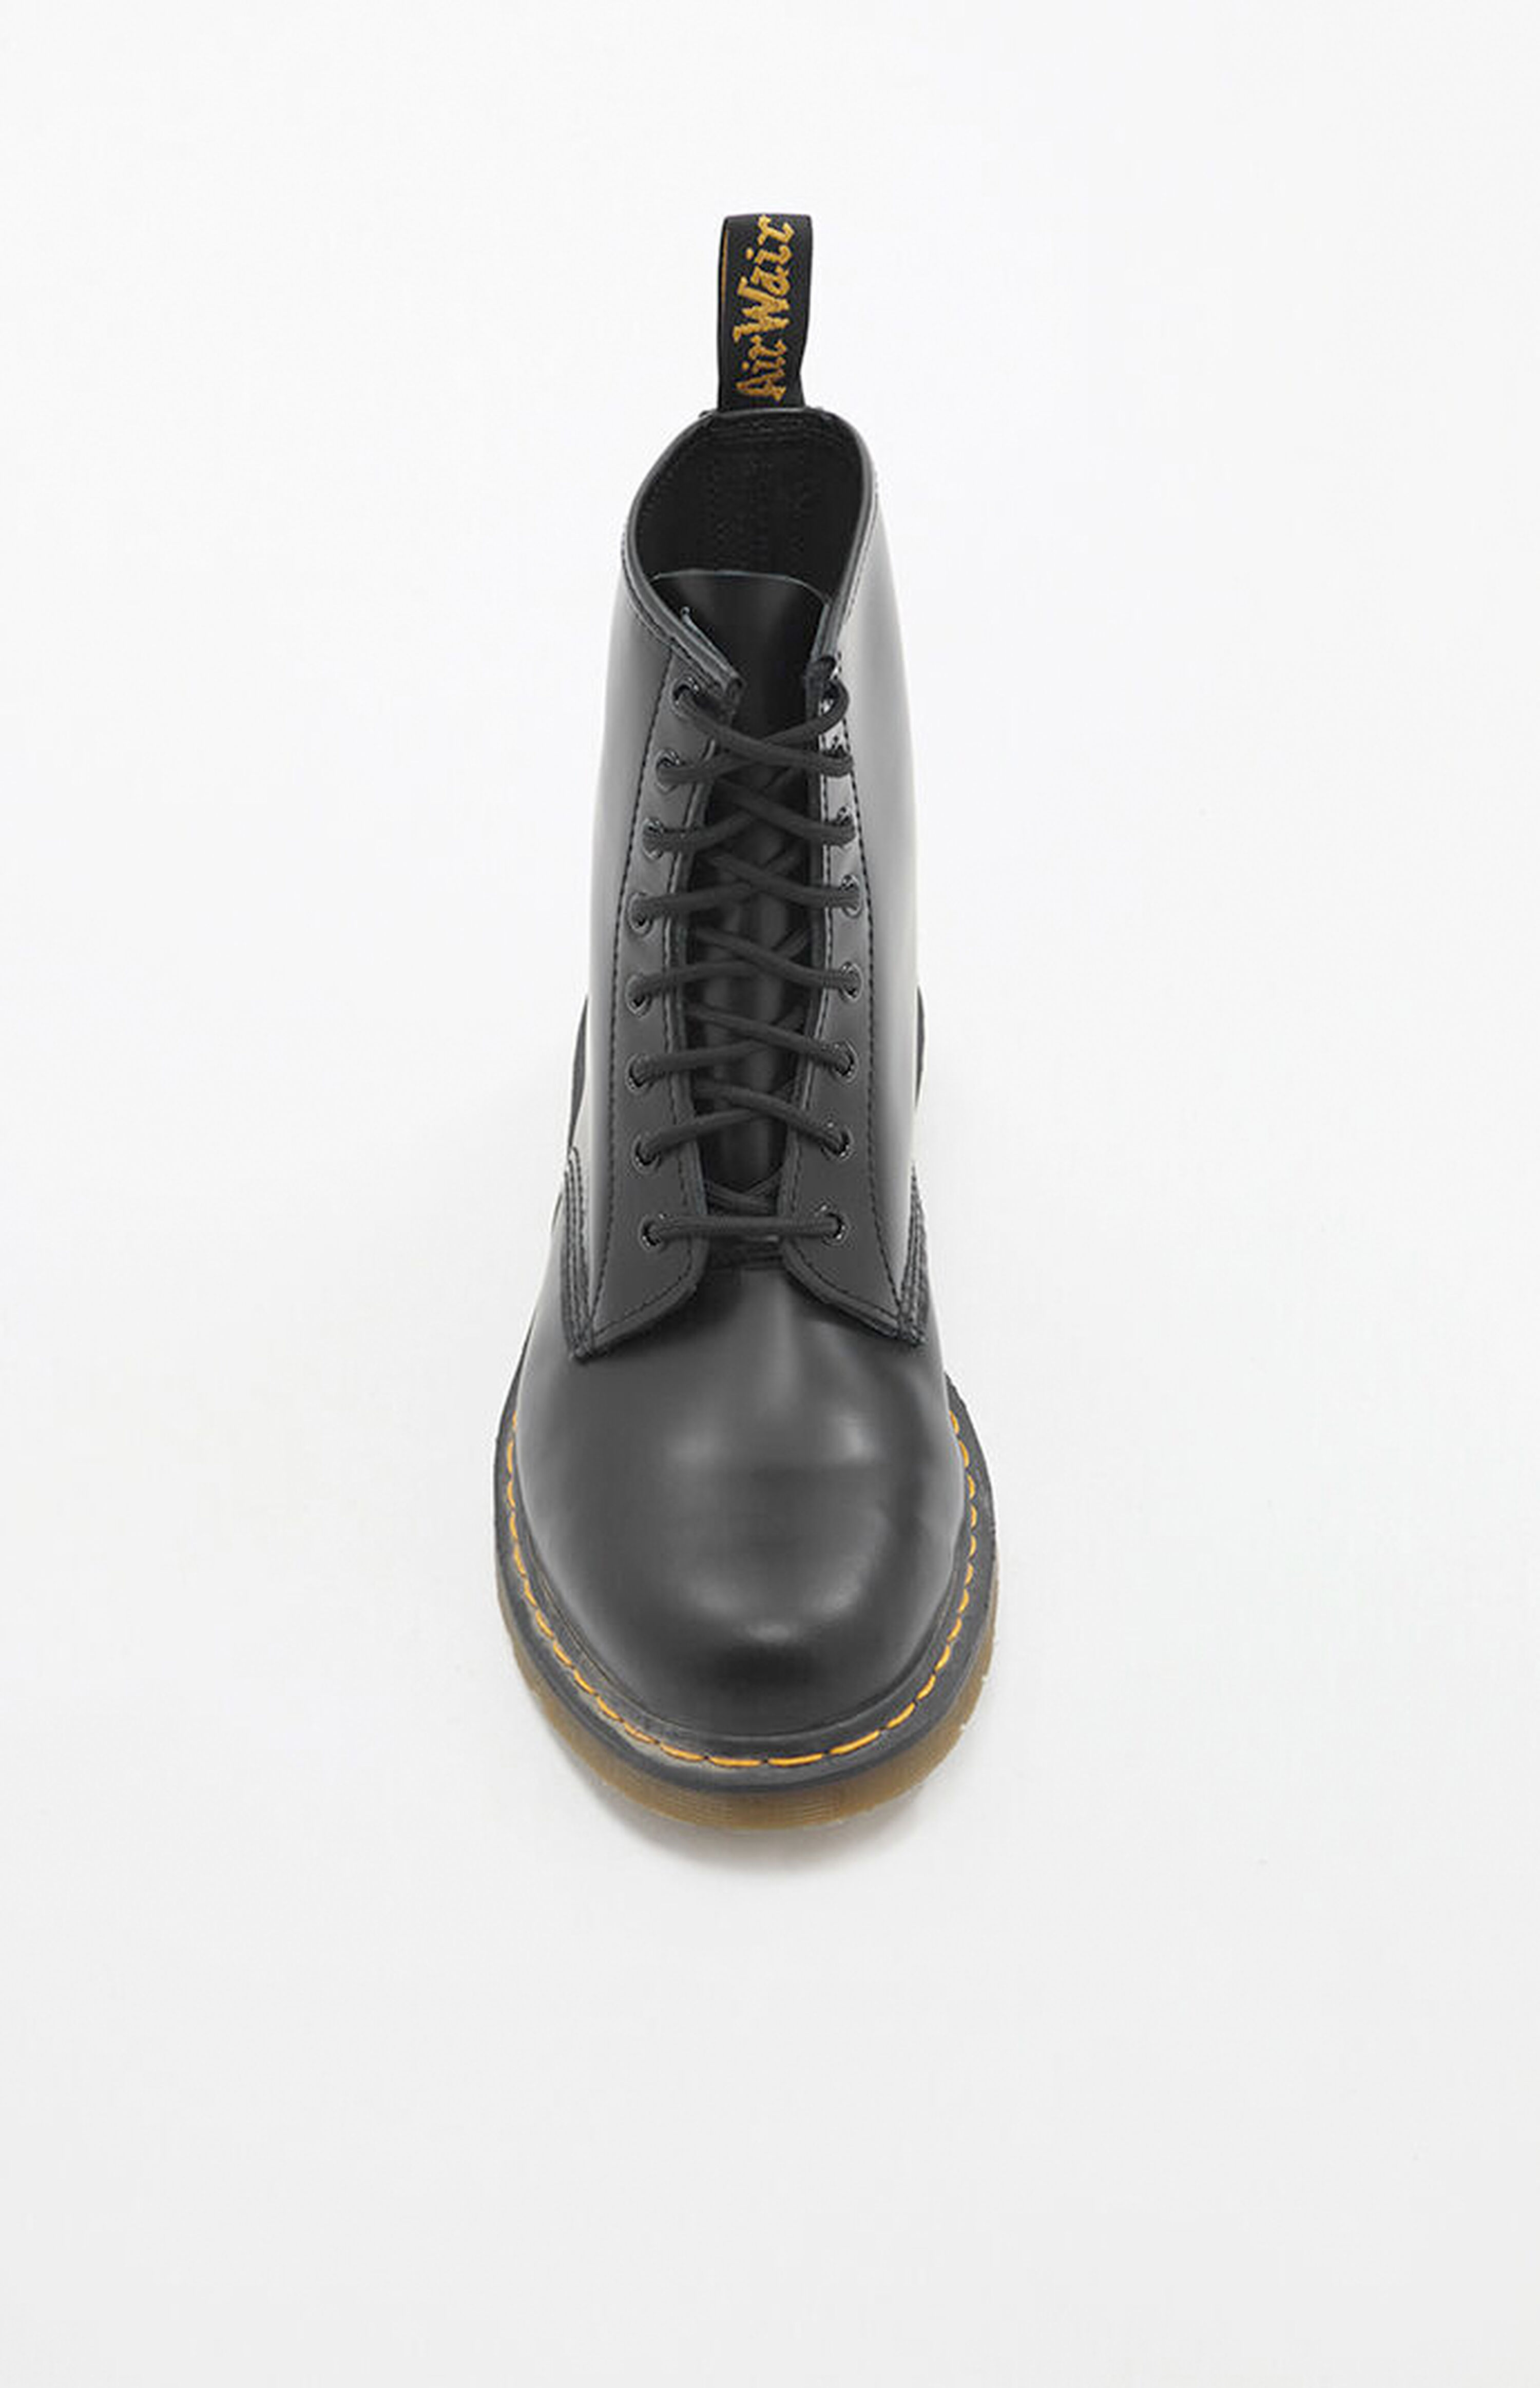 Dr Martens 1460 Smooth Leather Lace Up Boots | PacSun